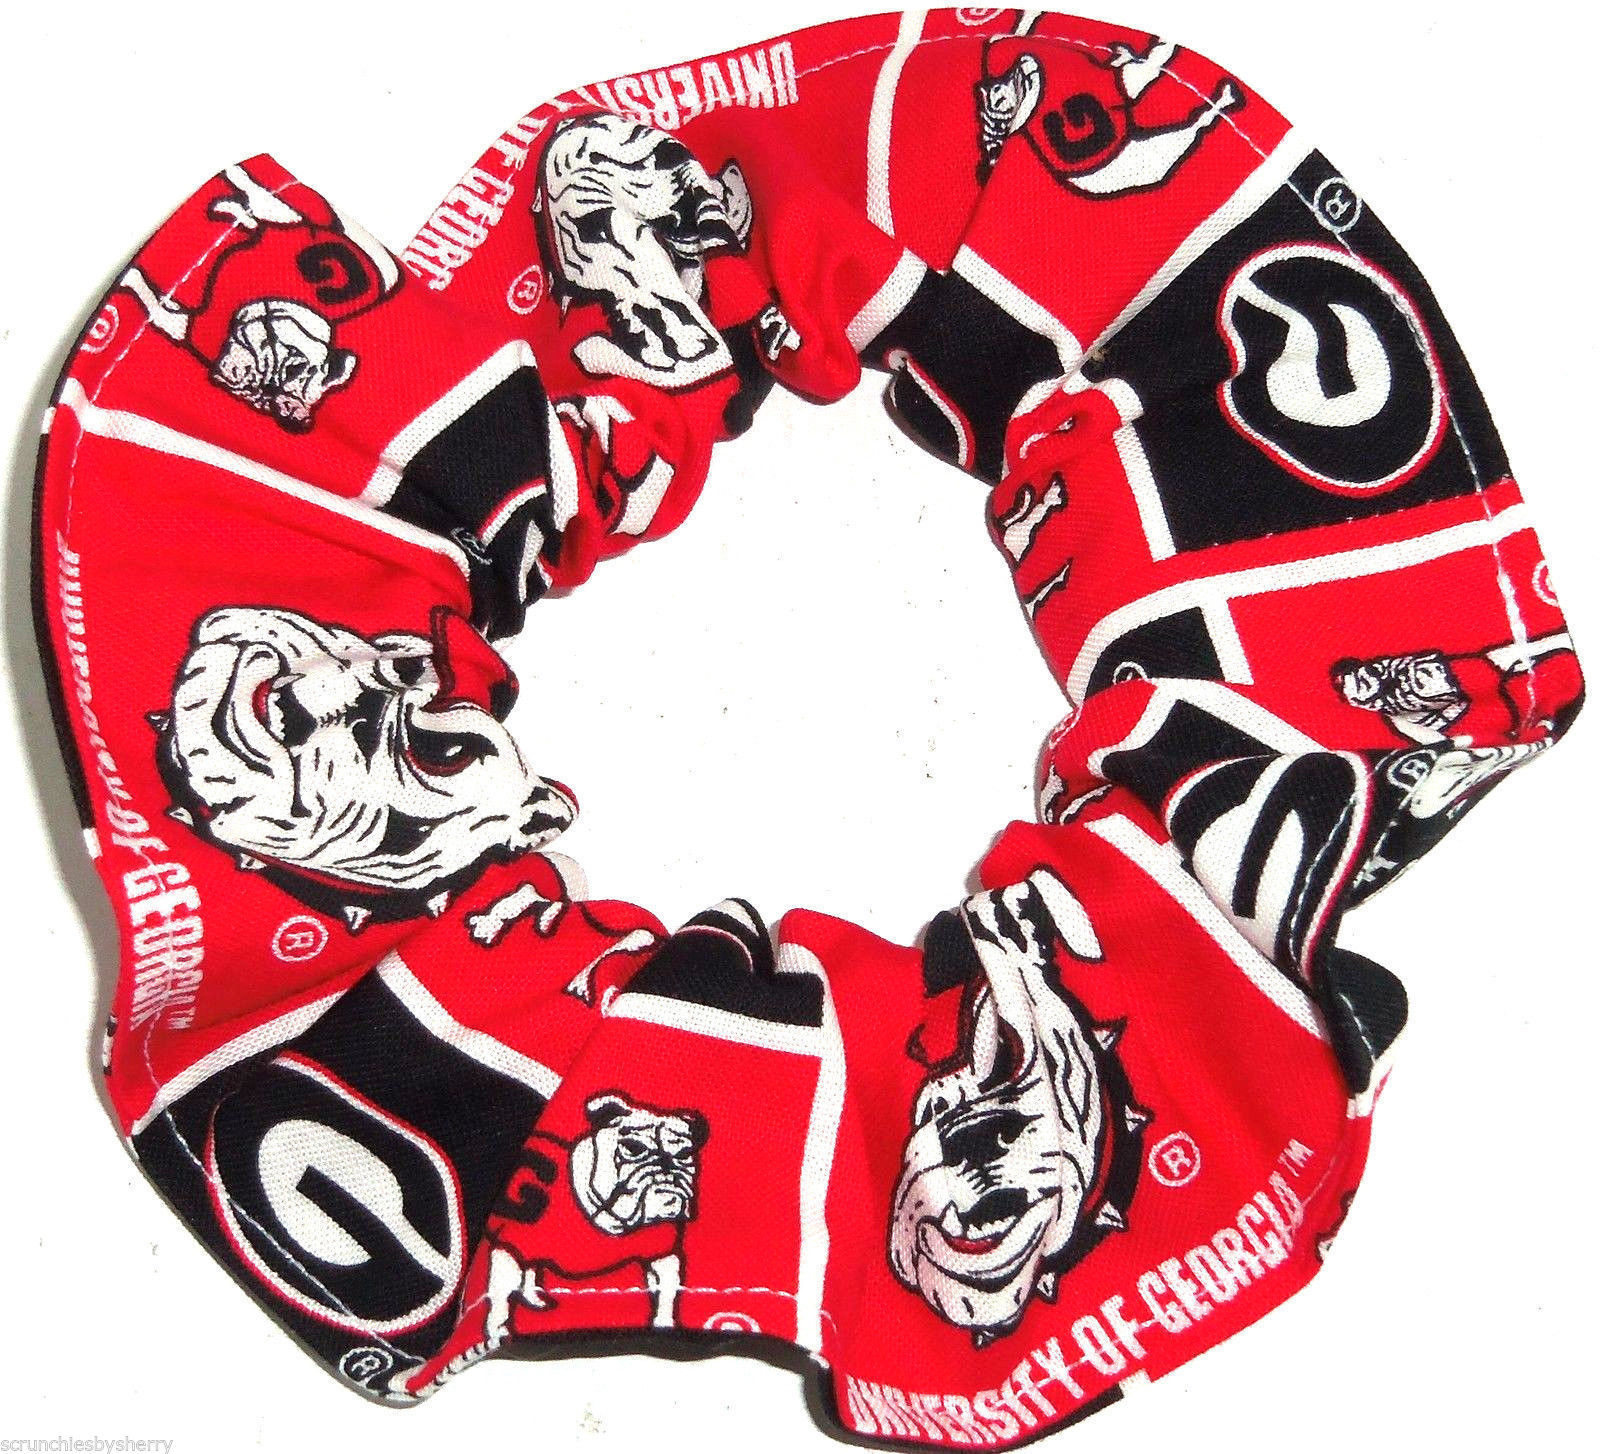 Primary image for Georgia Bulldogs Fabric Hair Scrunchie Scrunchies by Sherry NCAA